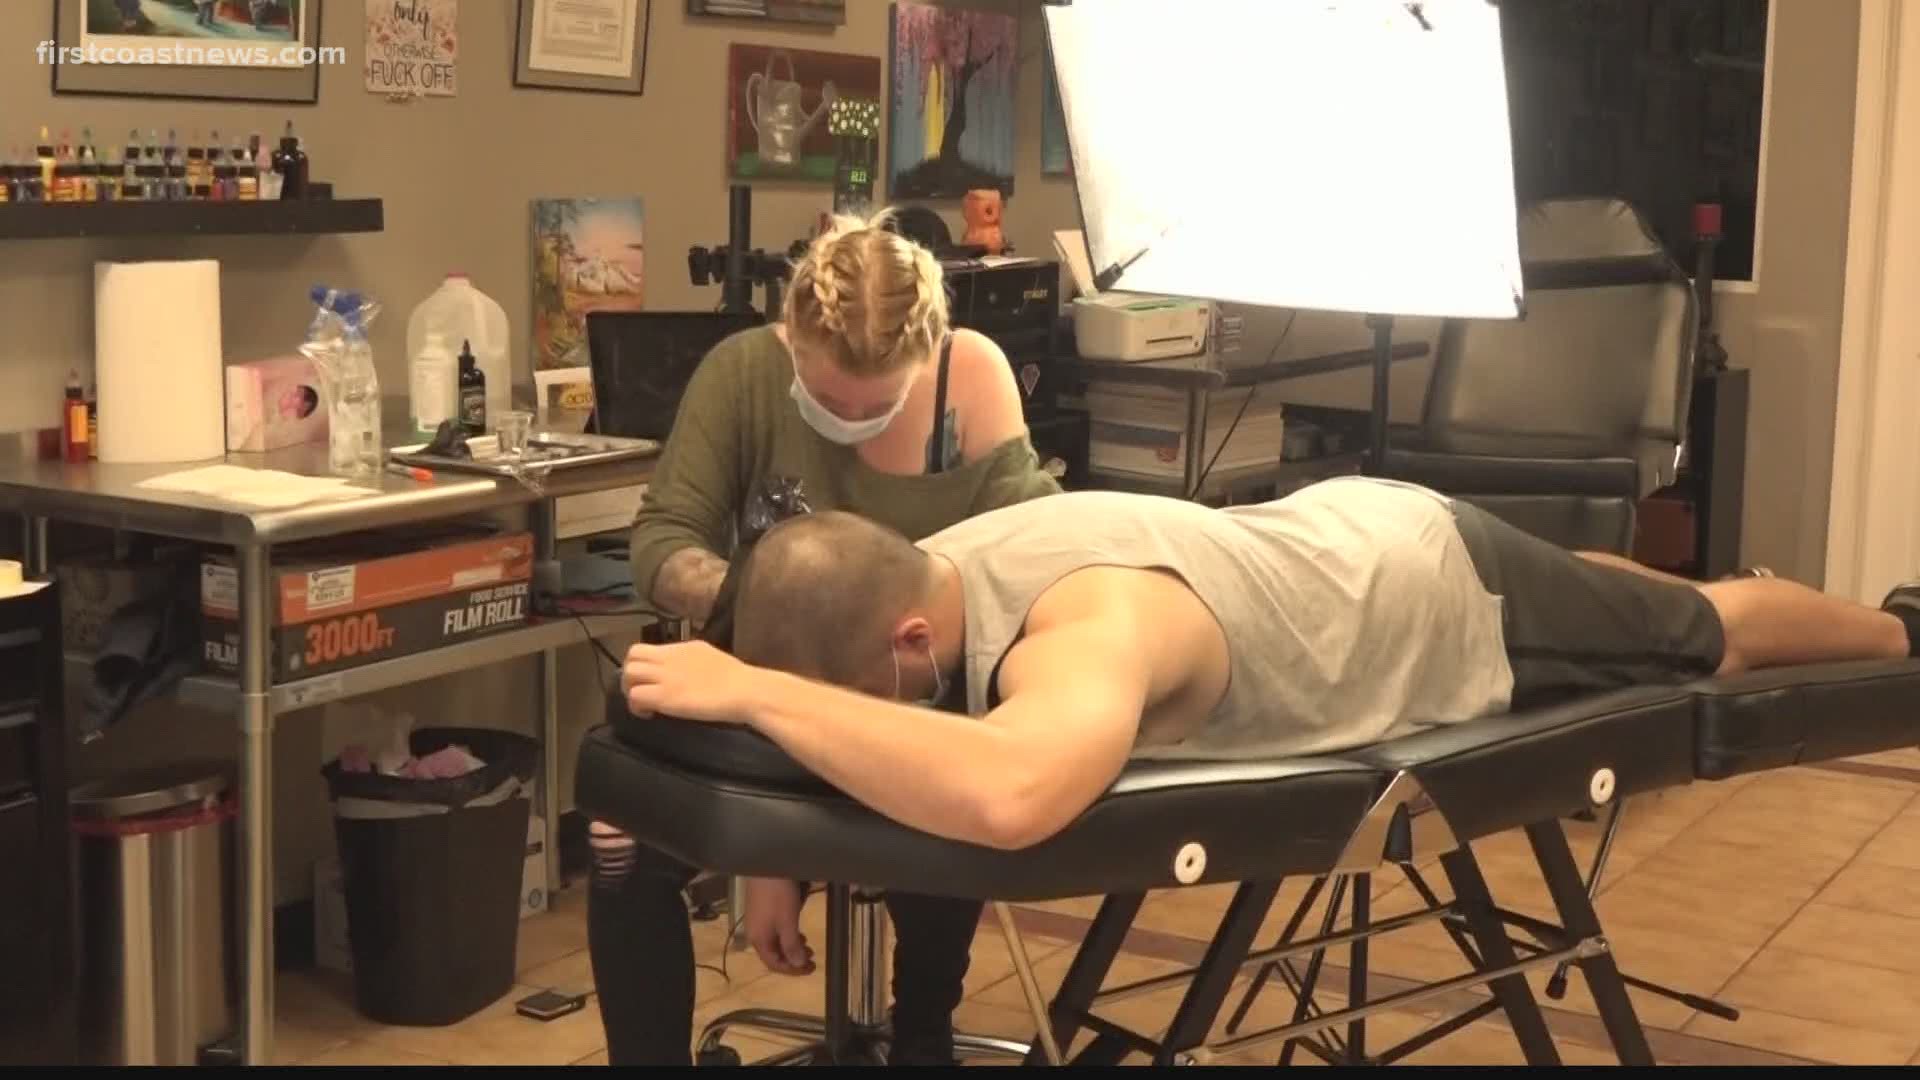 A tattoo parlor in Georgia is among many non-essential businesses reopening in the state amid COVID-19.